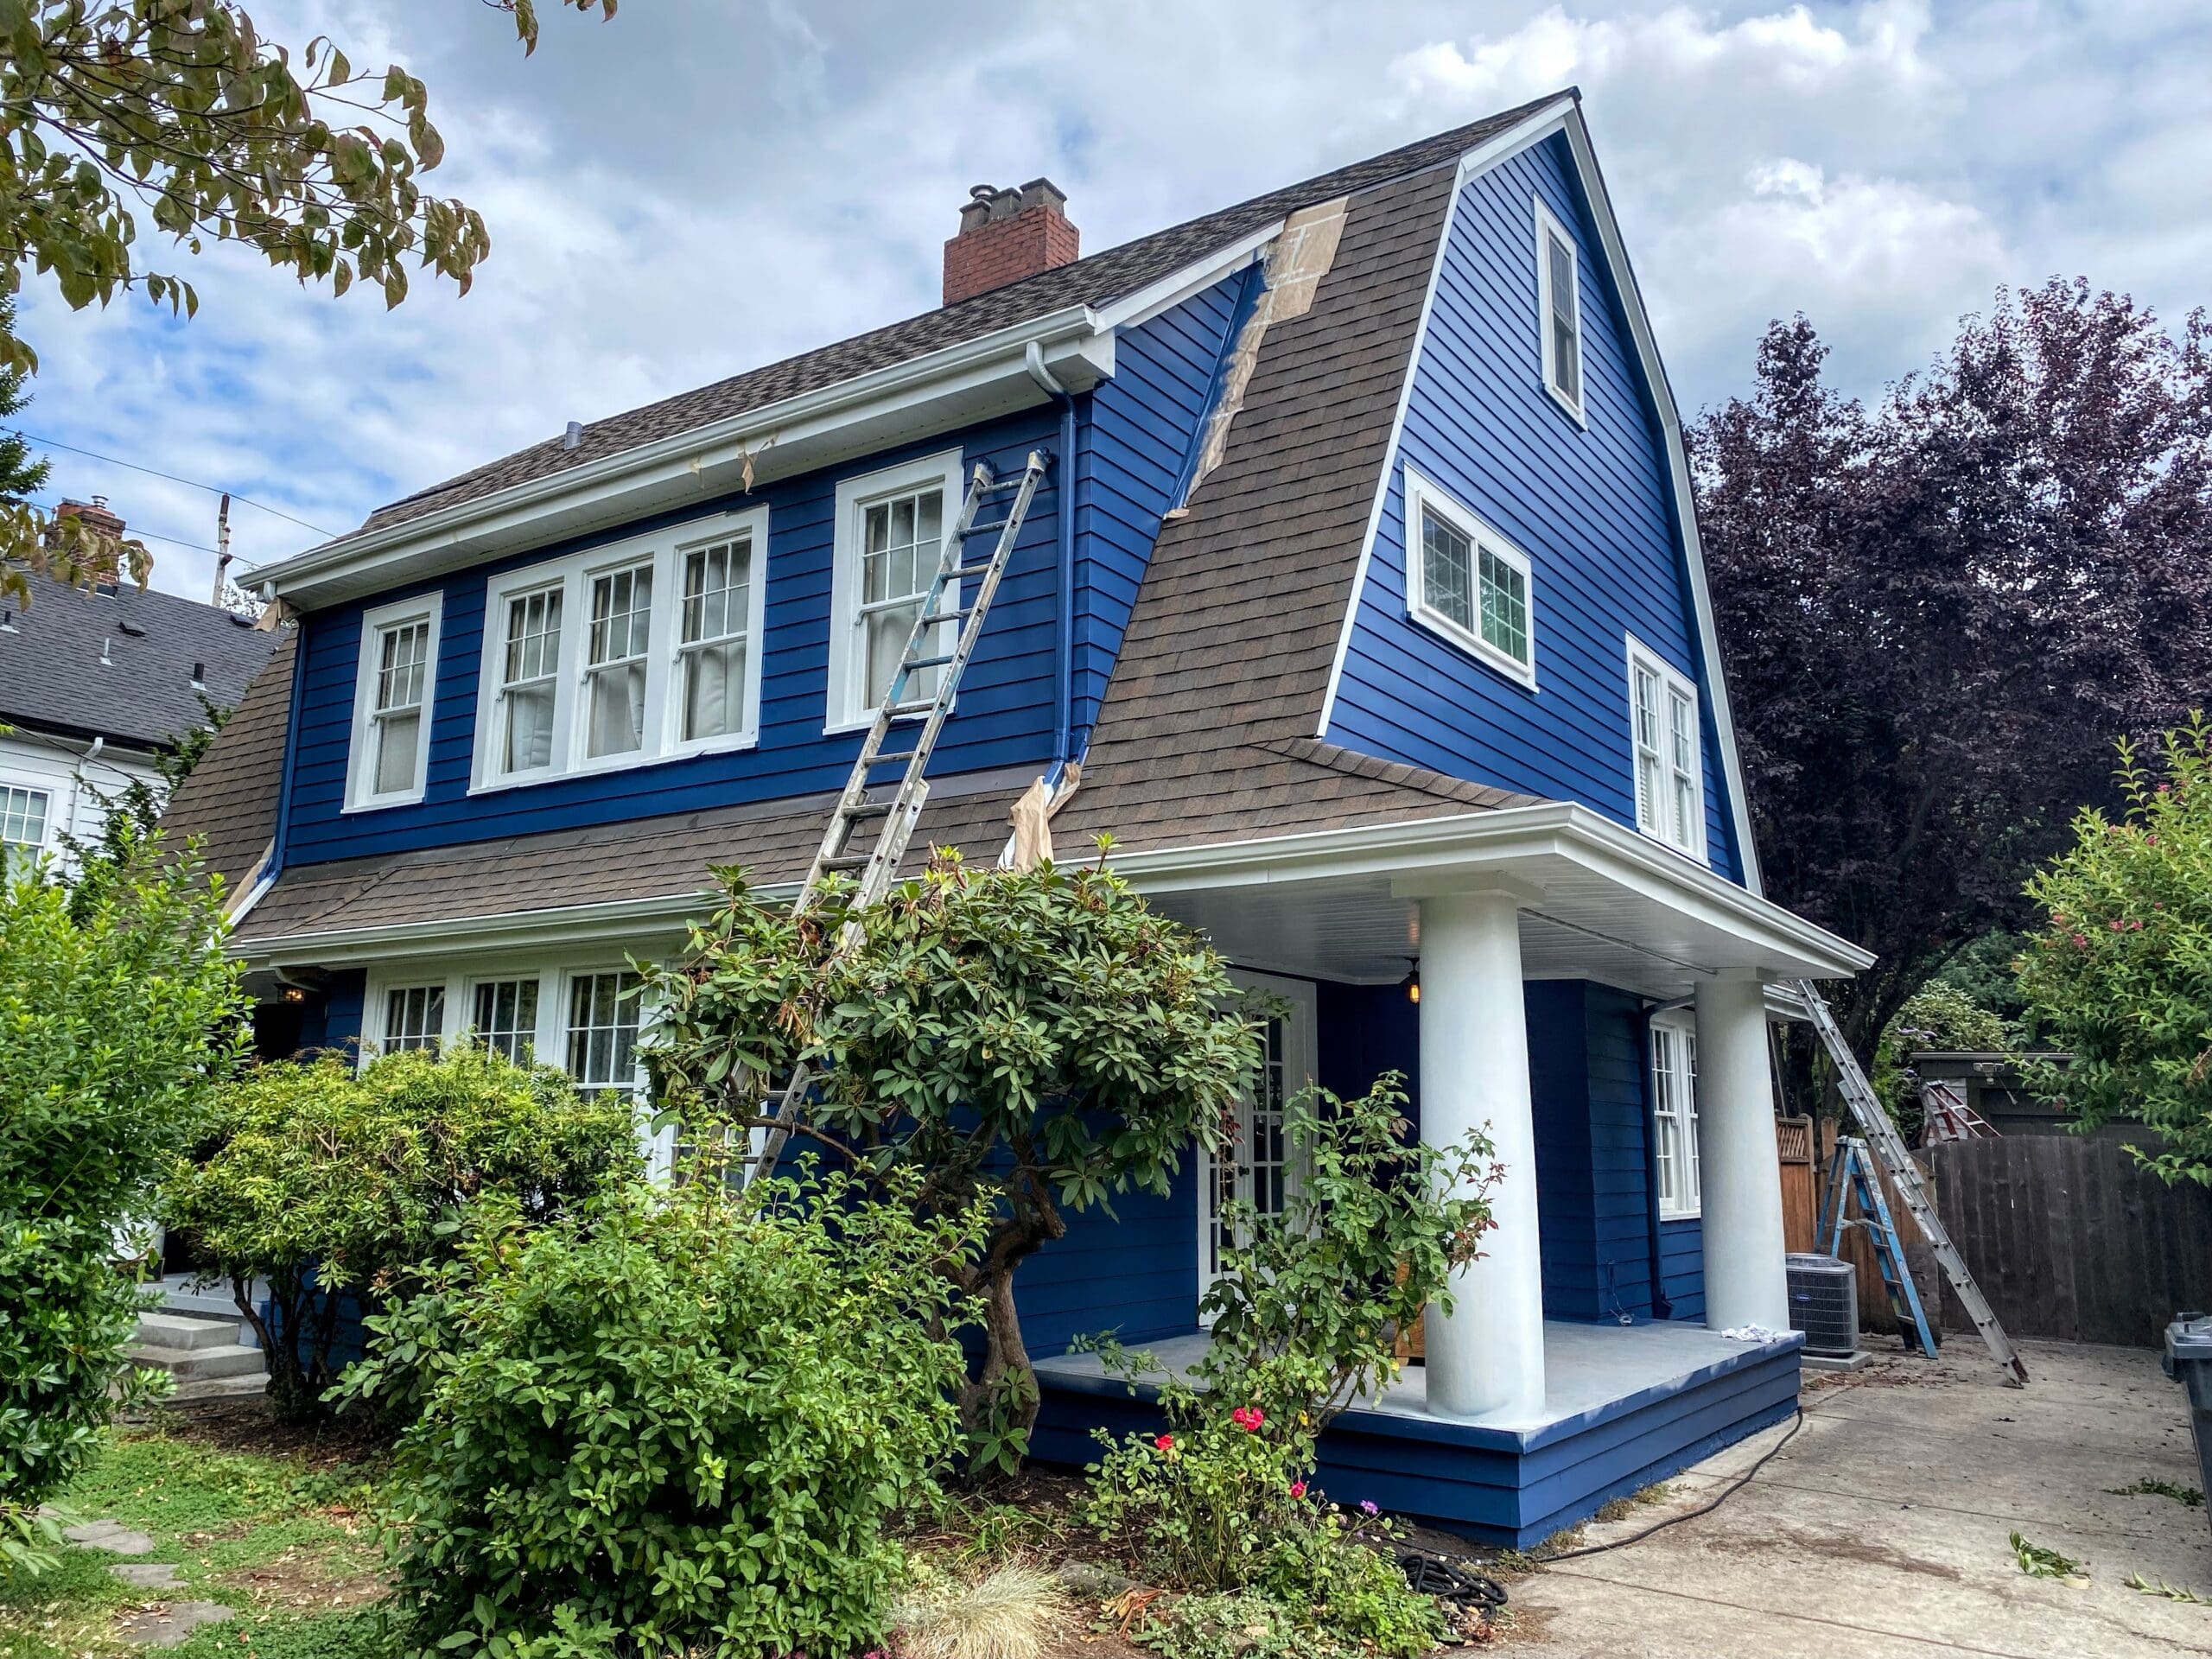 New, blue siding being installed and painted on a traditional farmhouse to illustrate best home upgrades.